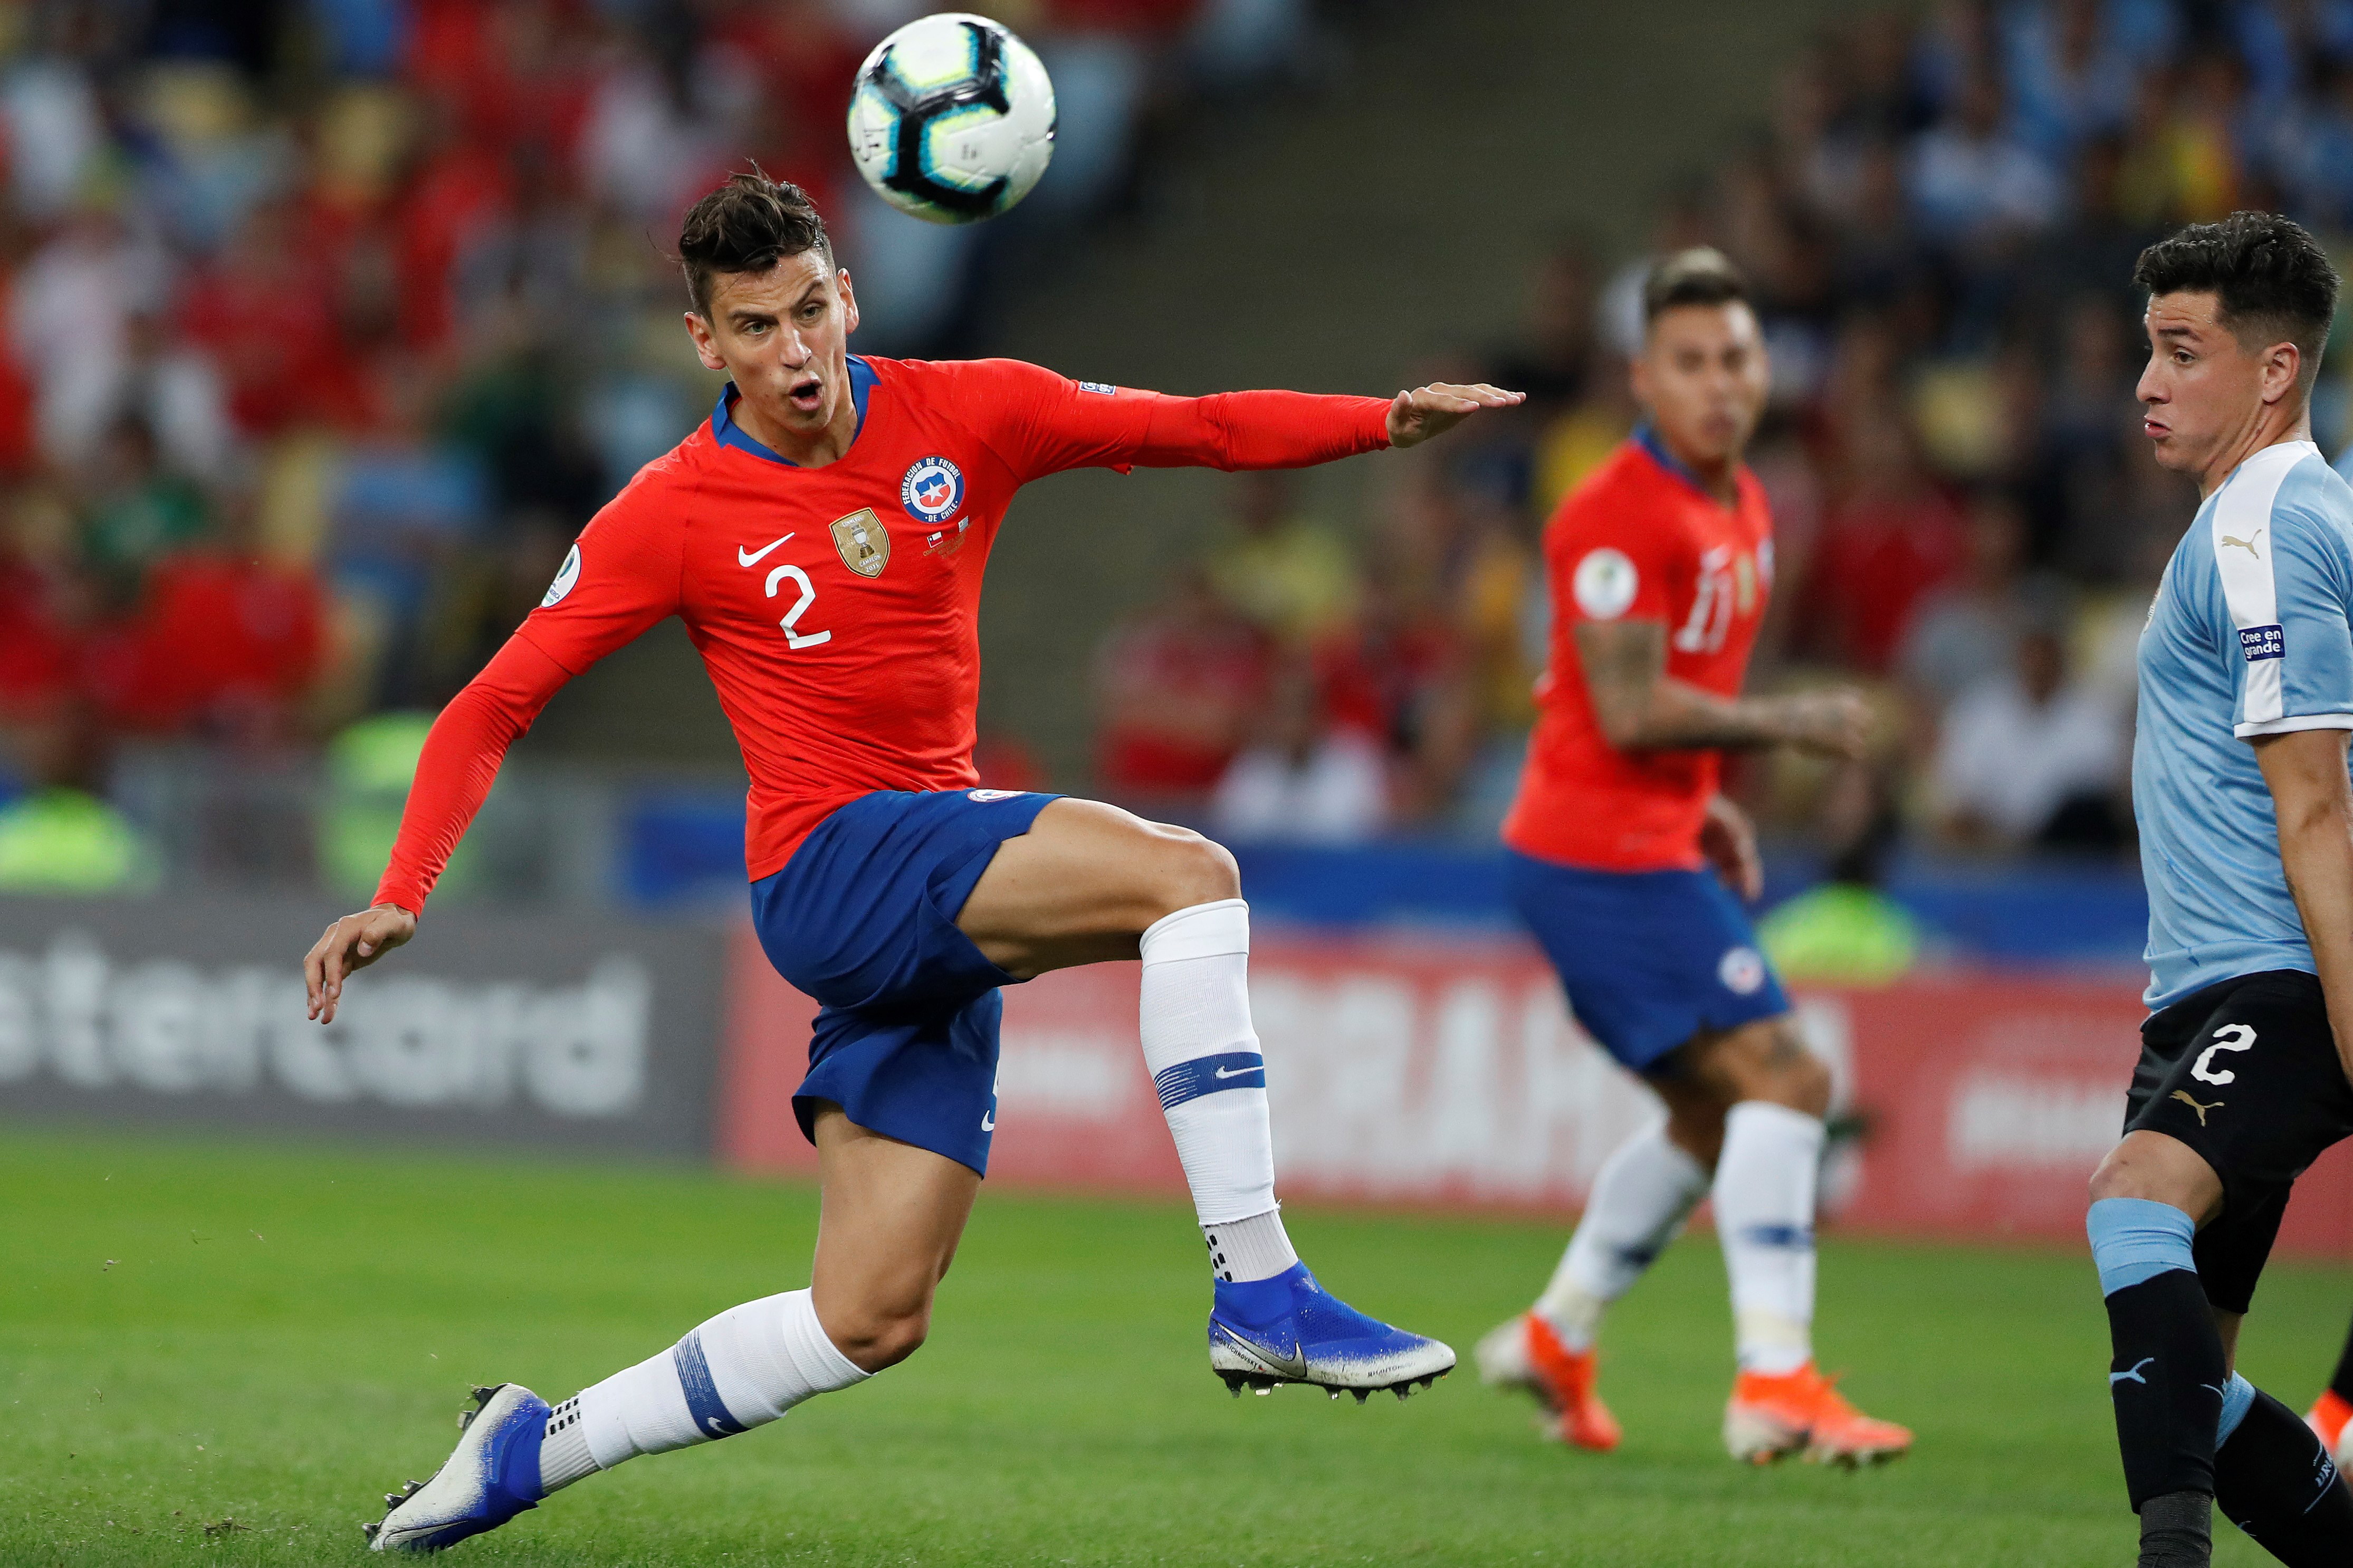 epa07671791 Igor Litchnovsky (C) of Chile in action during the Copa America 2019 Group C soccer match between Chile and Uruguay, at the Maracana Stadium in Rio de Janeiro, Brazil, 24 June 2019.  EPA/FERNANDO MAIA